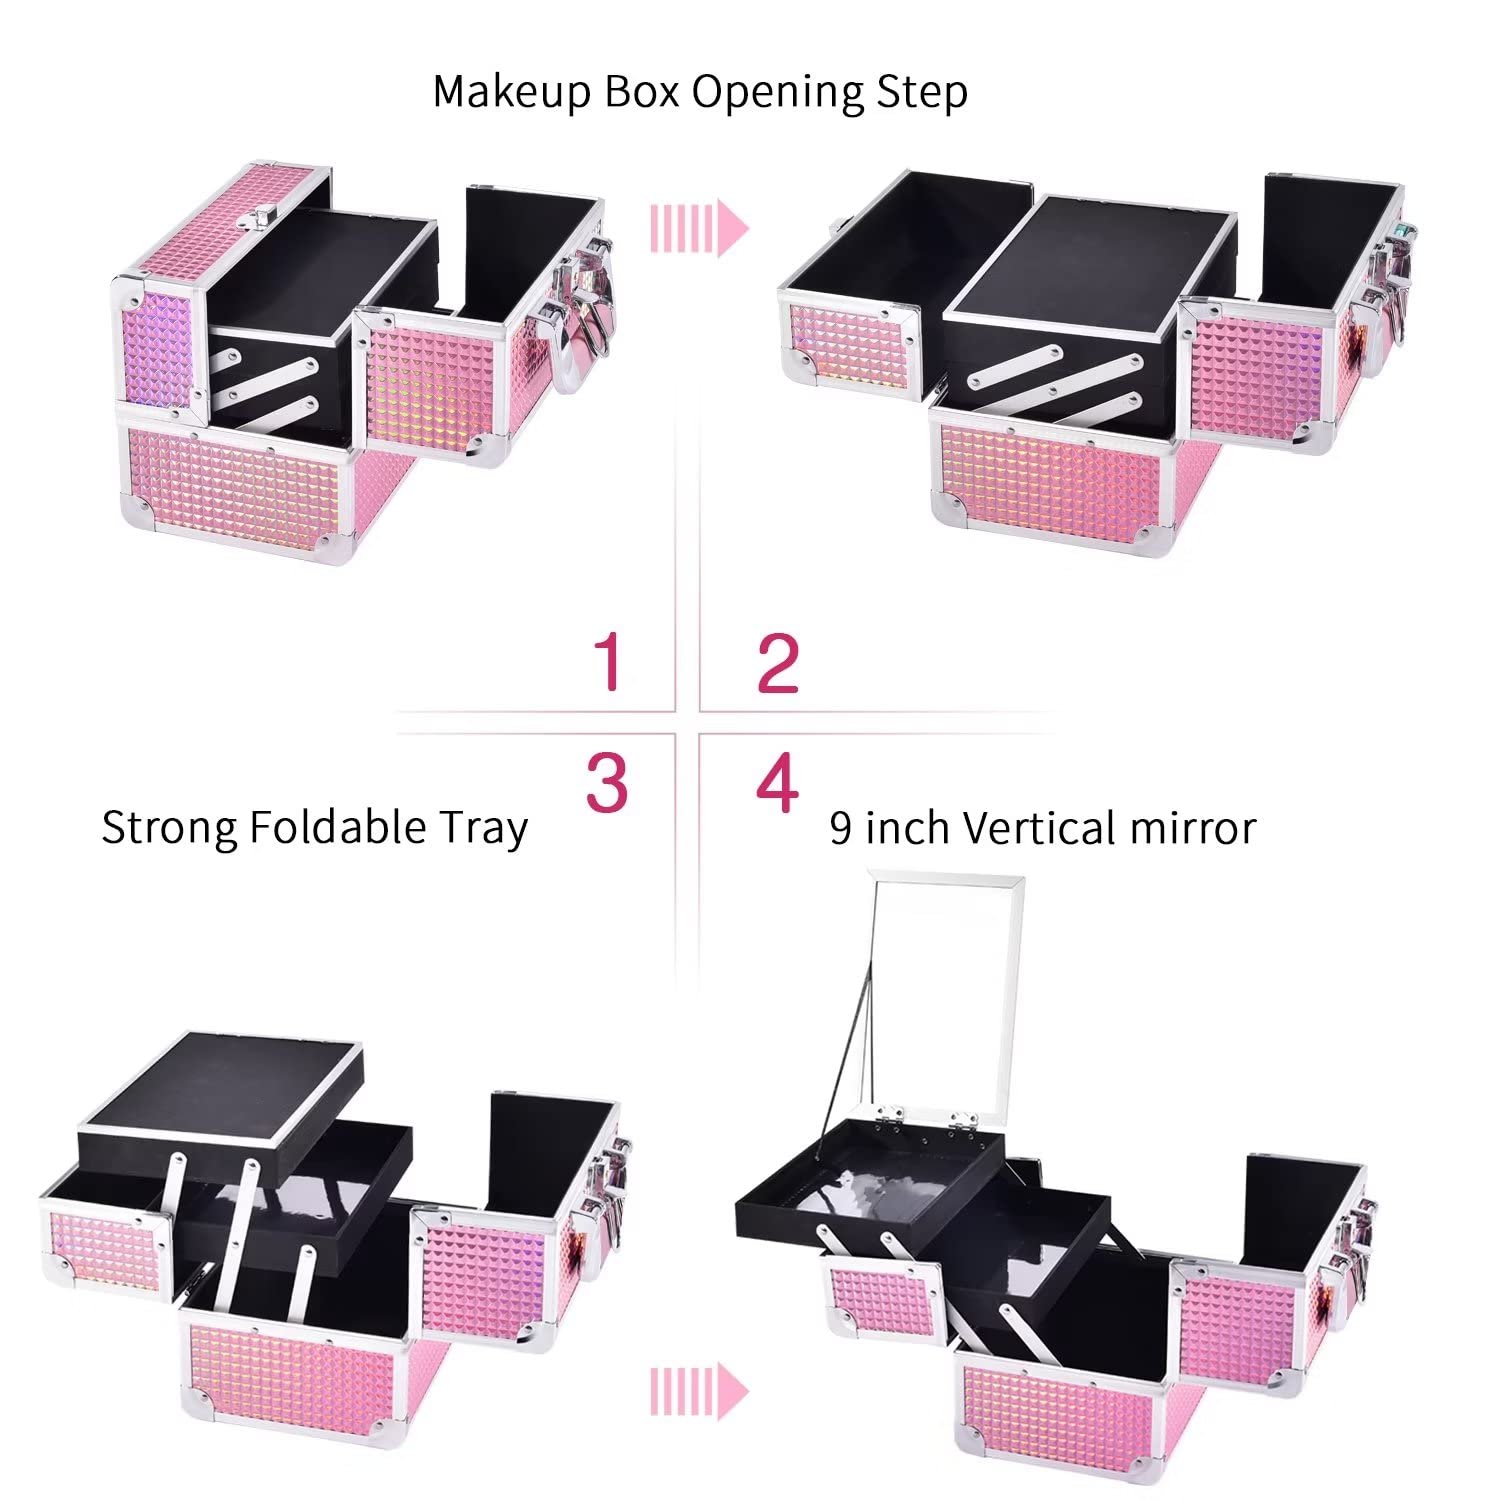 Joligrace Makeup Train Case Cosmetic Box Portable Makeup Case Organizer 2 Trays Makeup Storage with Mirror Locking for Cosmetologist Aesthetic Supplies Nail Tech Traveling Makeup Box Mermaid Pink